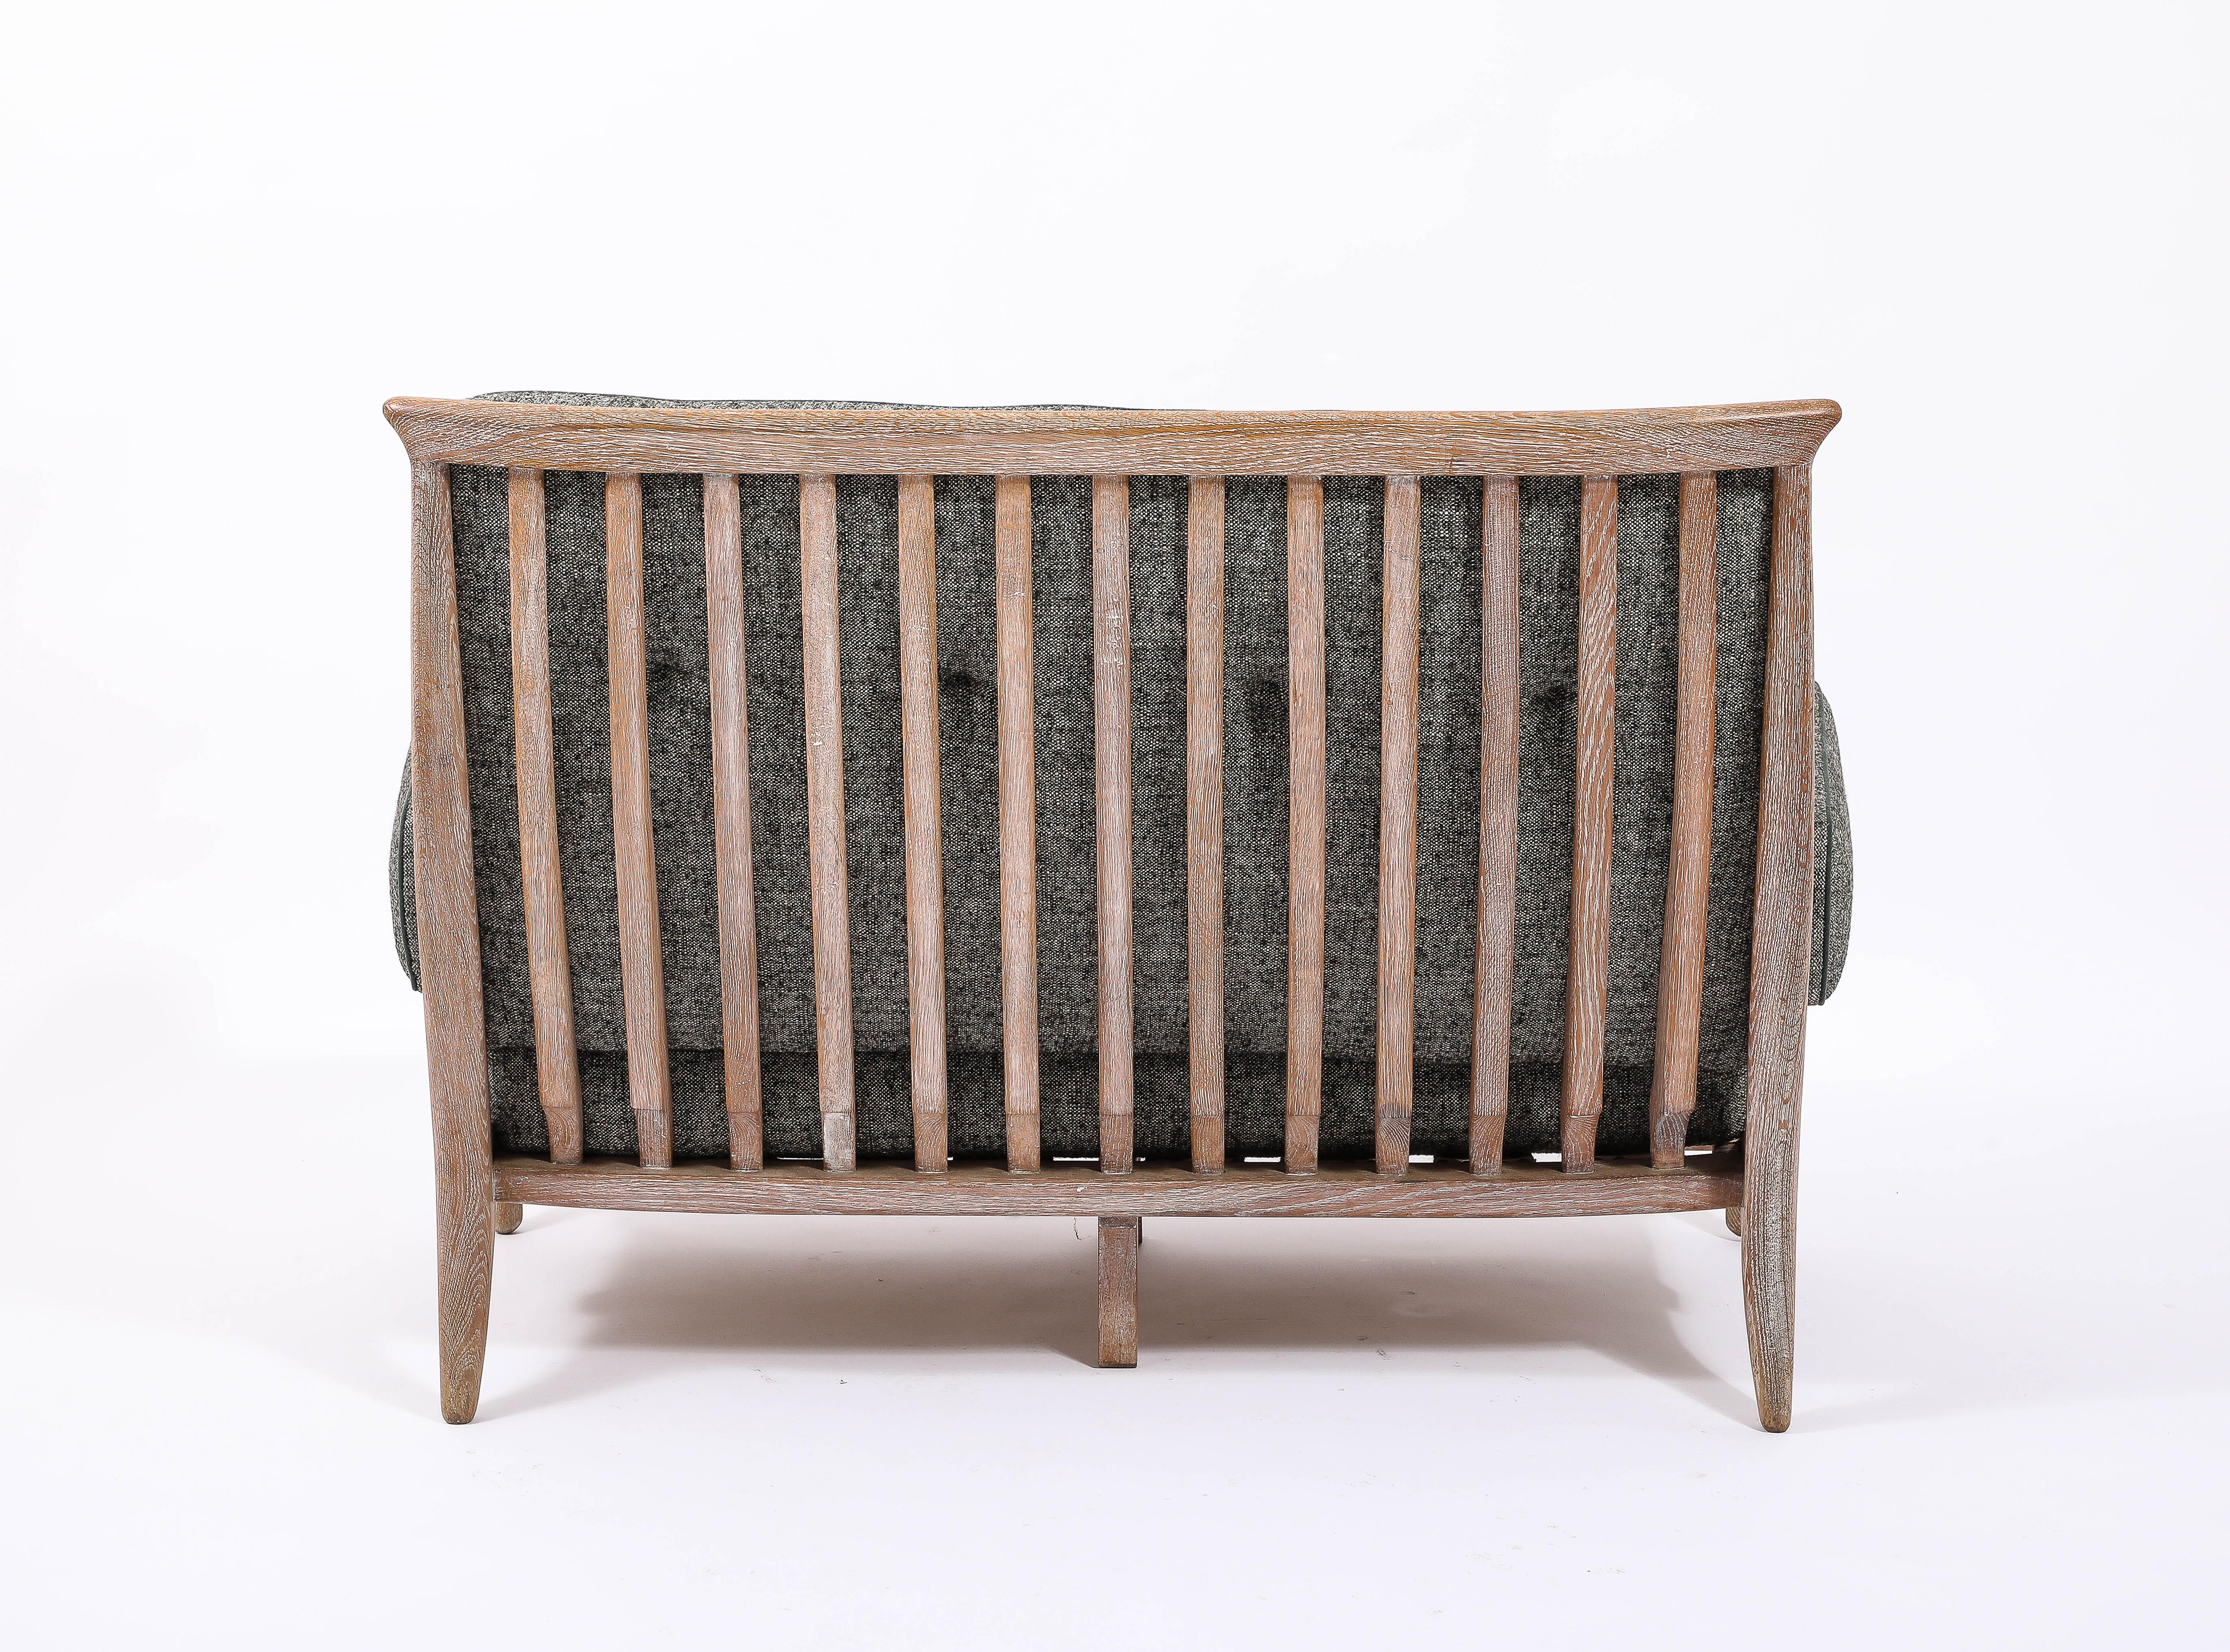 20th Century Guillerme & Chambron Settees in Oak, France 1960's For Sale